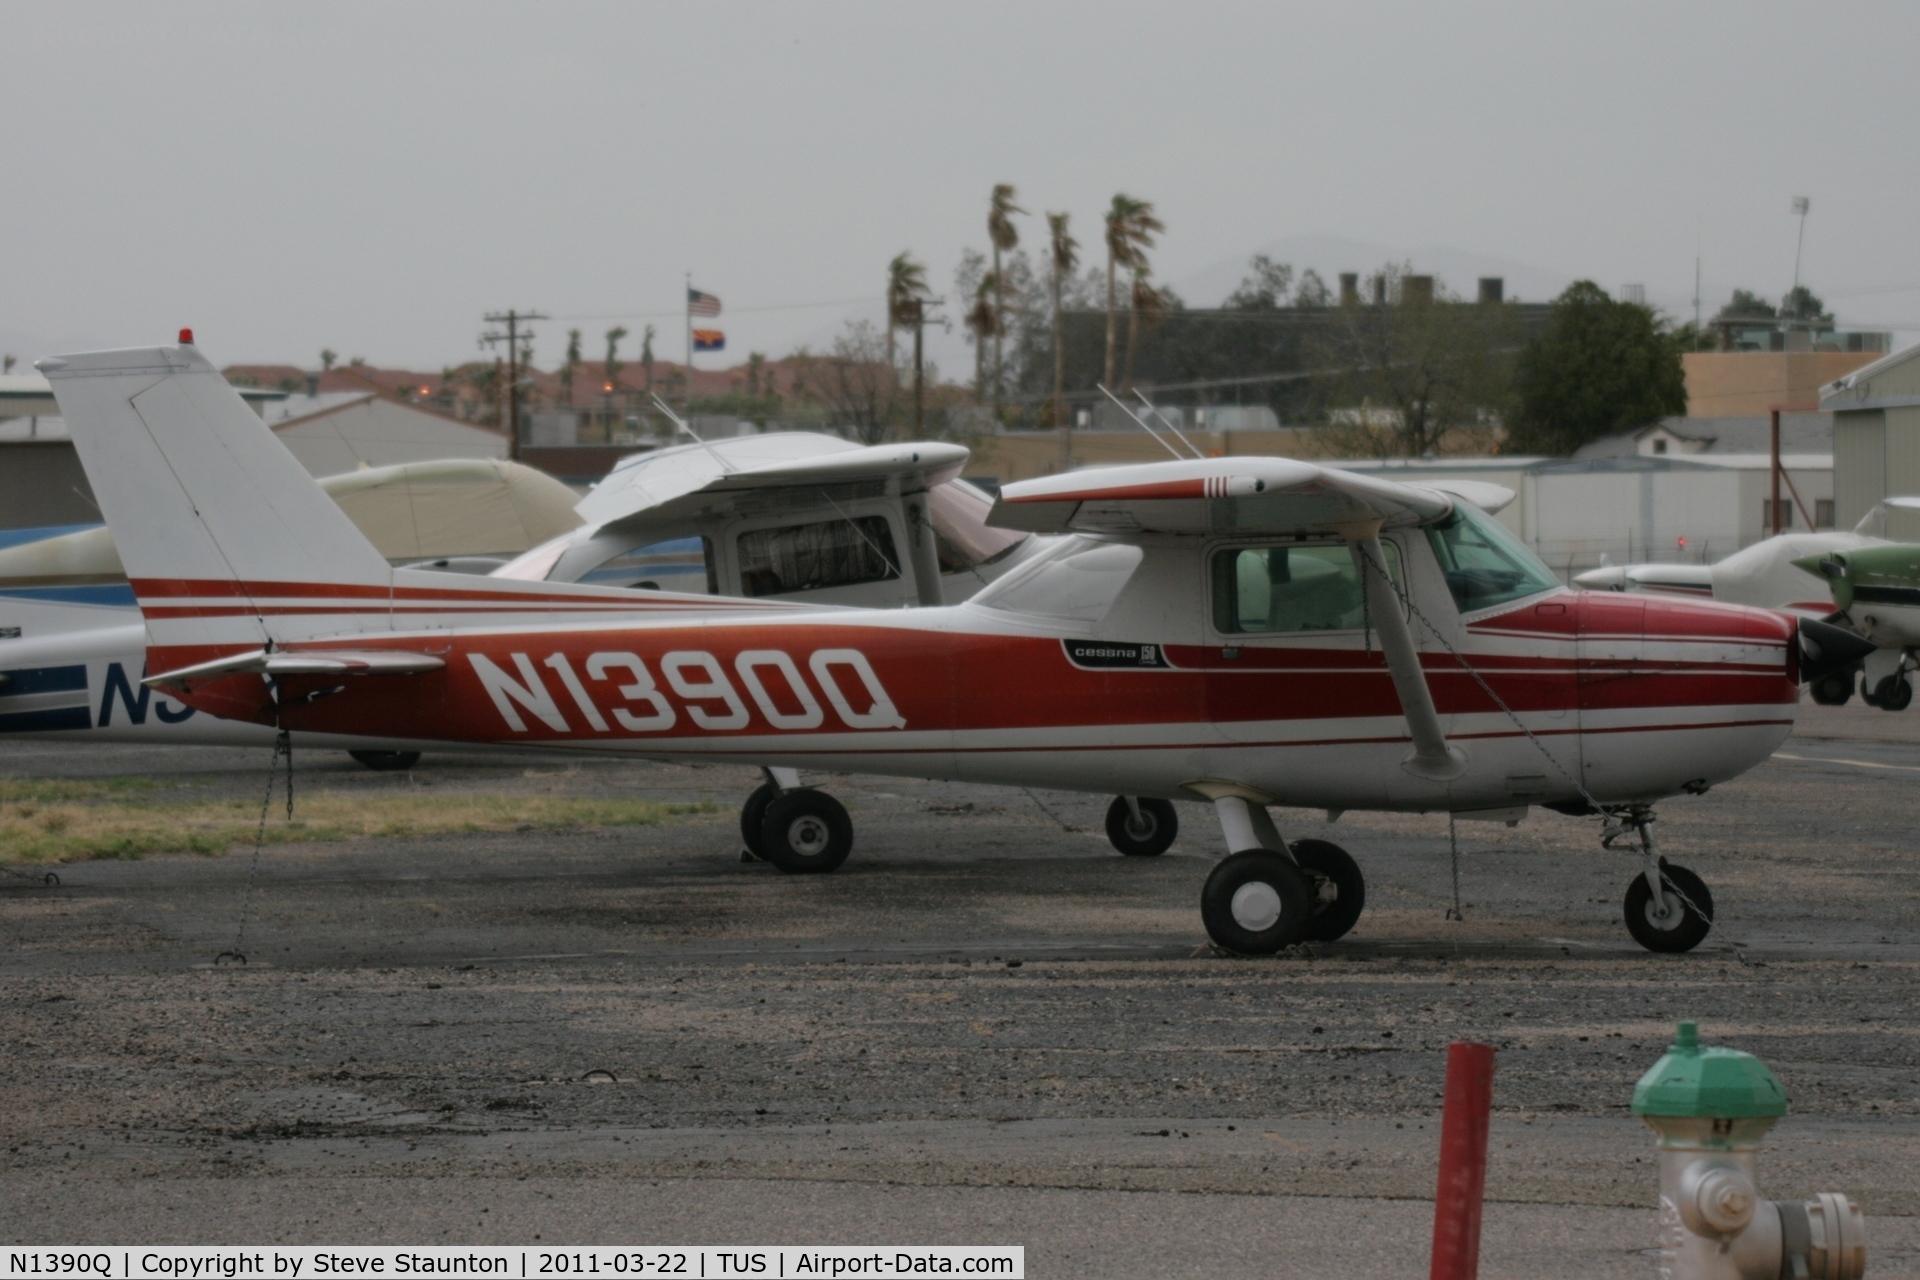 N1390Q, 1971 Cessna 150L C/N 15072690, Taken at Tucson International Airport, in March 2011 whilst on an Aeroprint Aviation tour